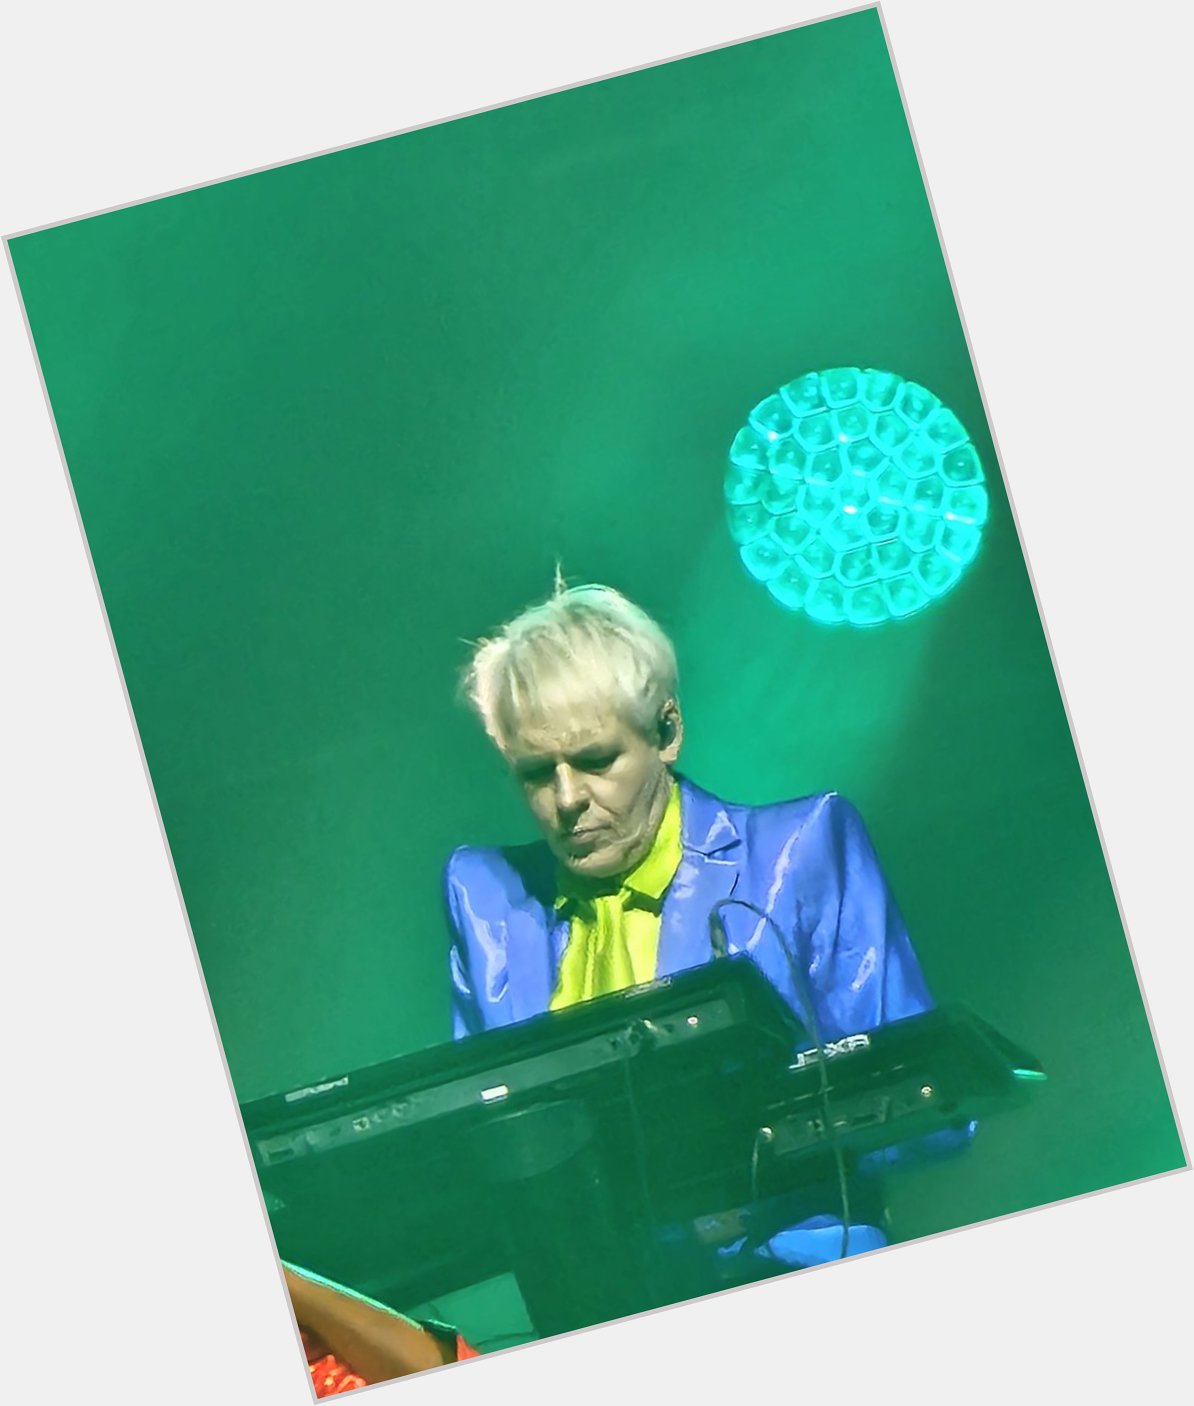   Happy Birthday Nick Rhodes. This was taken June 6th at The Moody Center in Austin Texas 